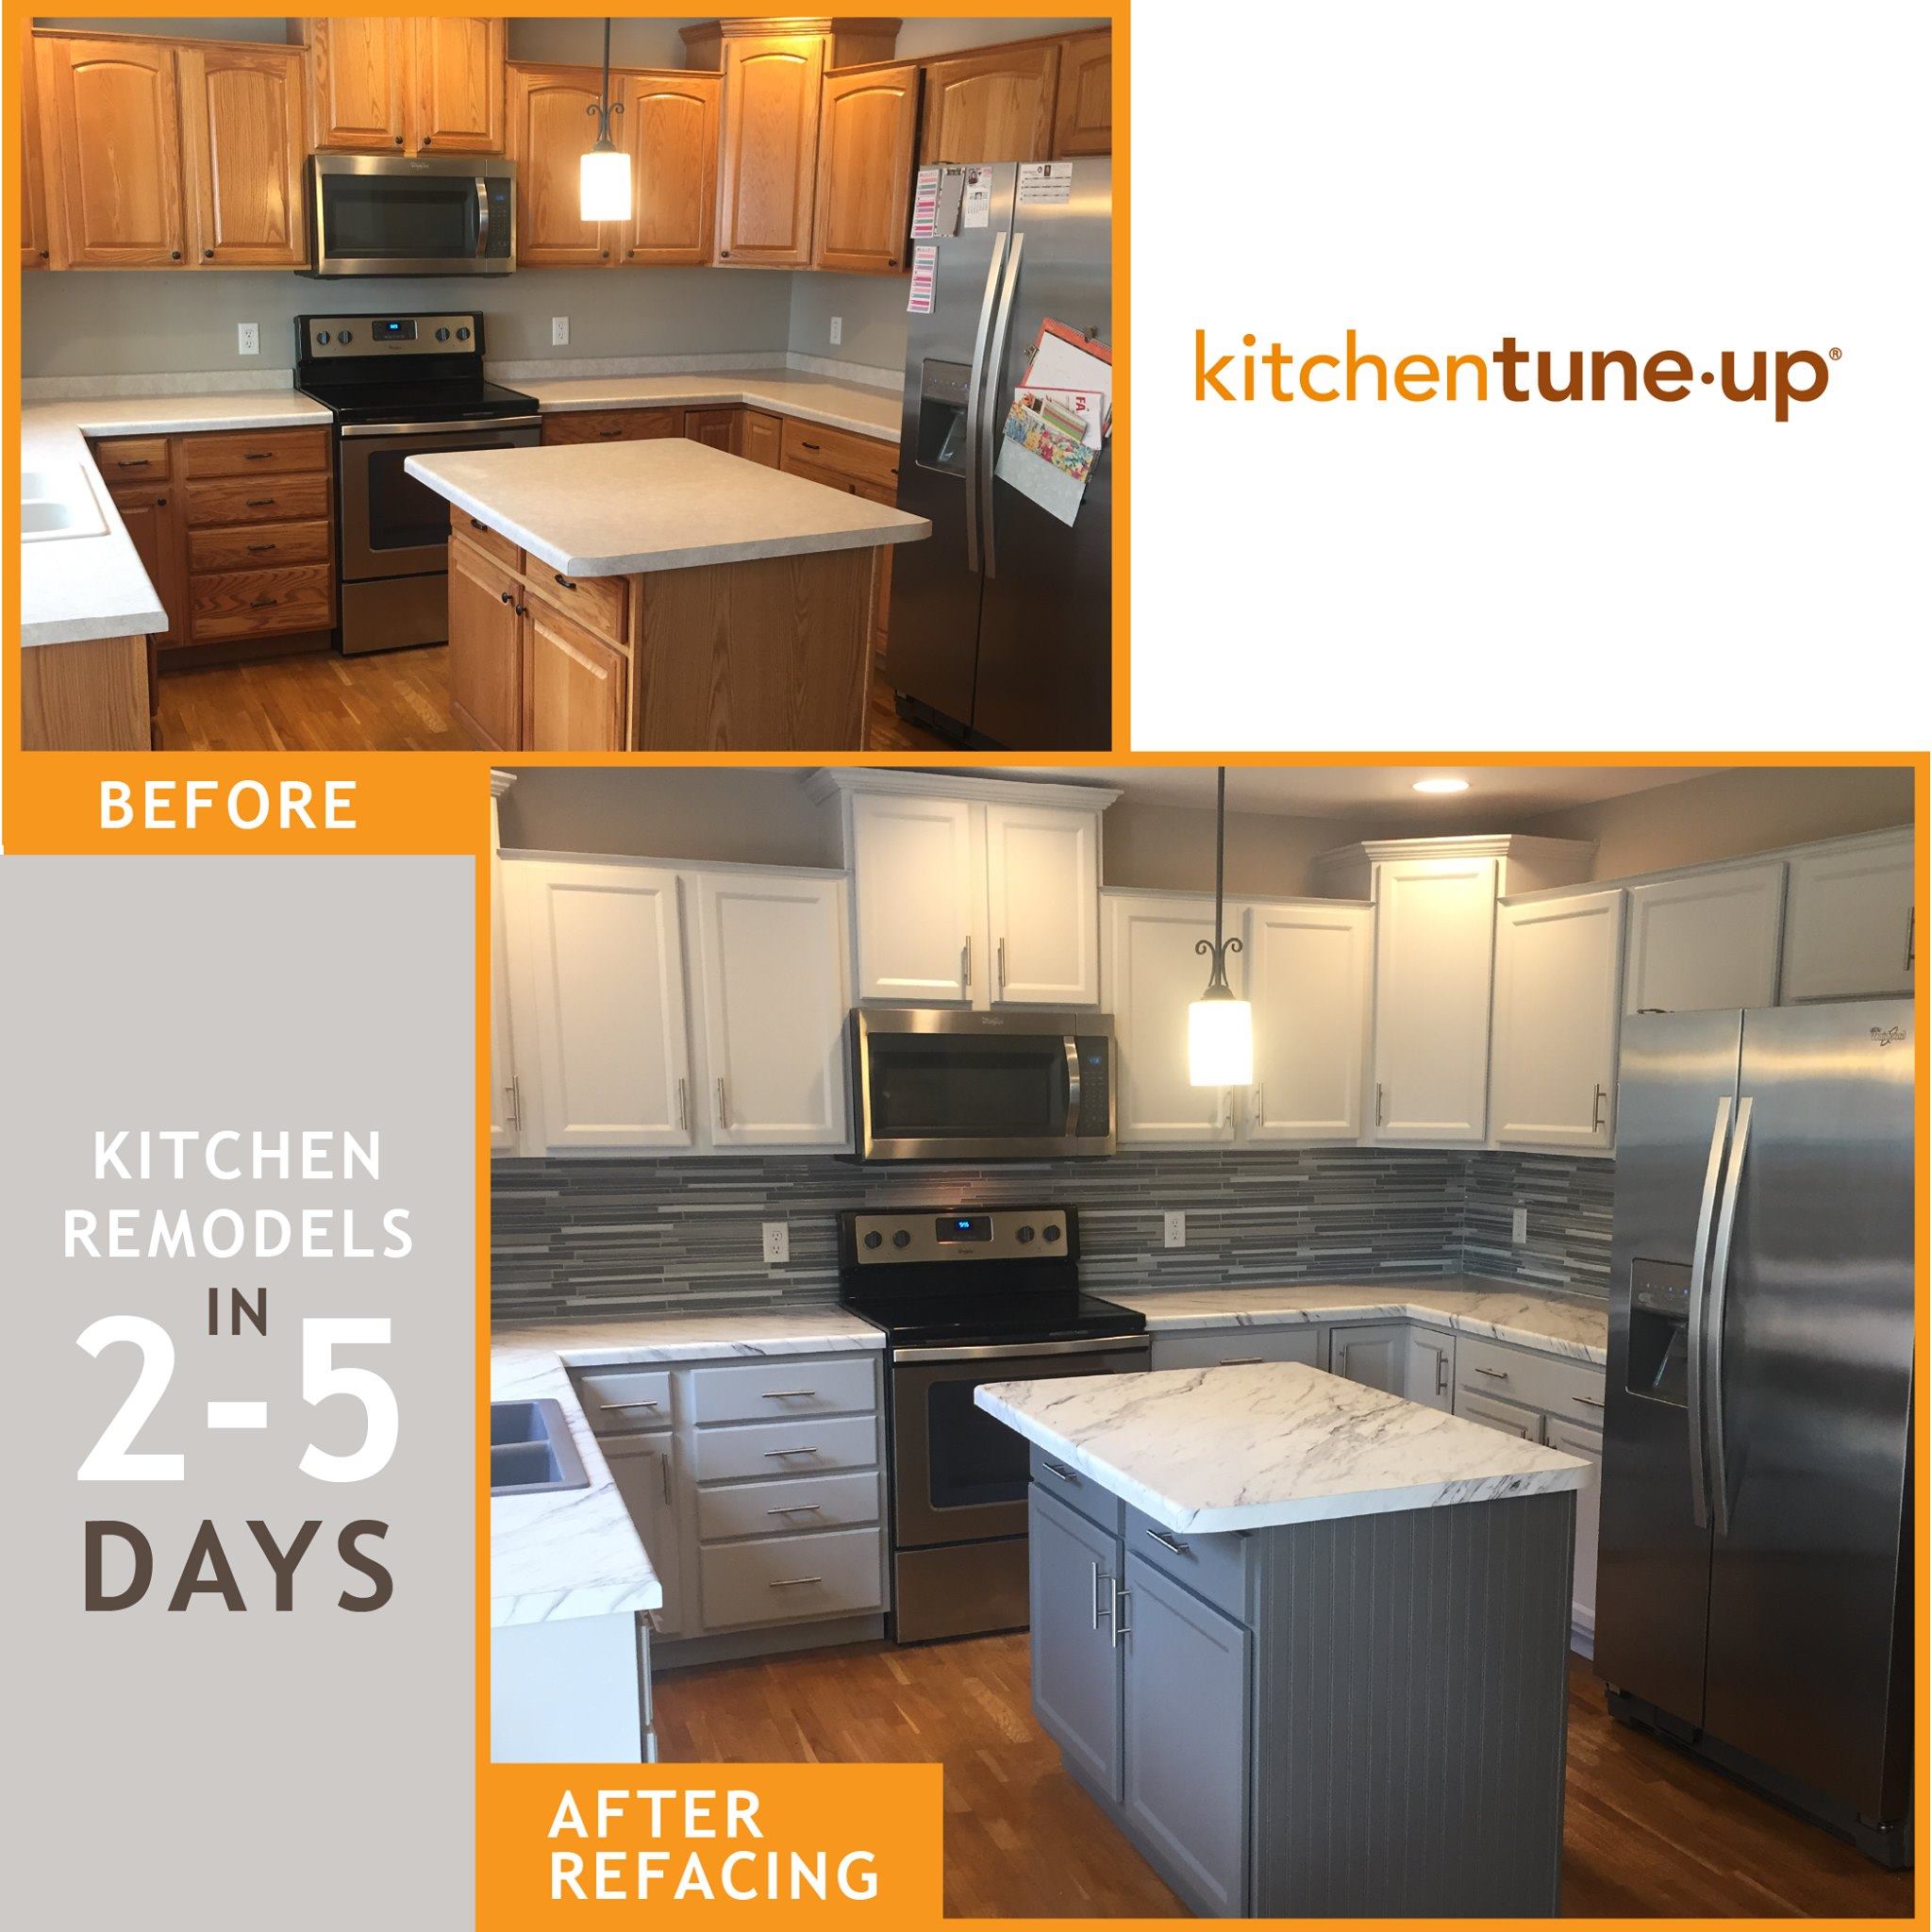 Kitchen Tune Up Class City Of Superior